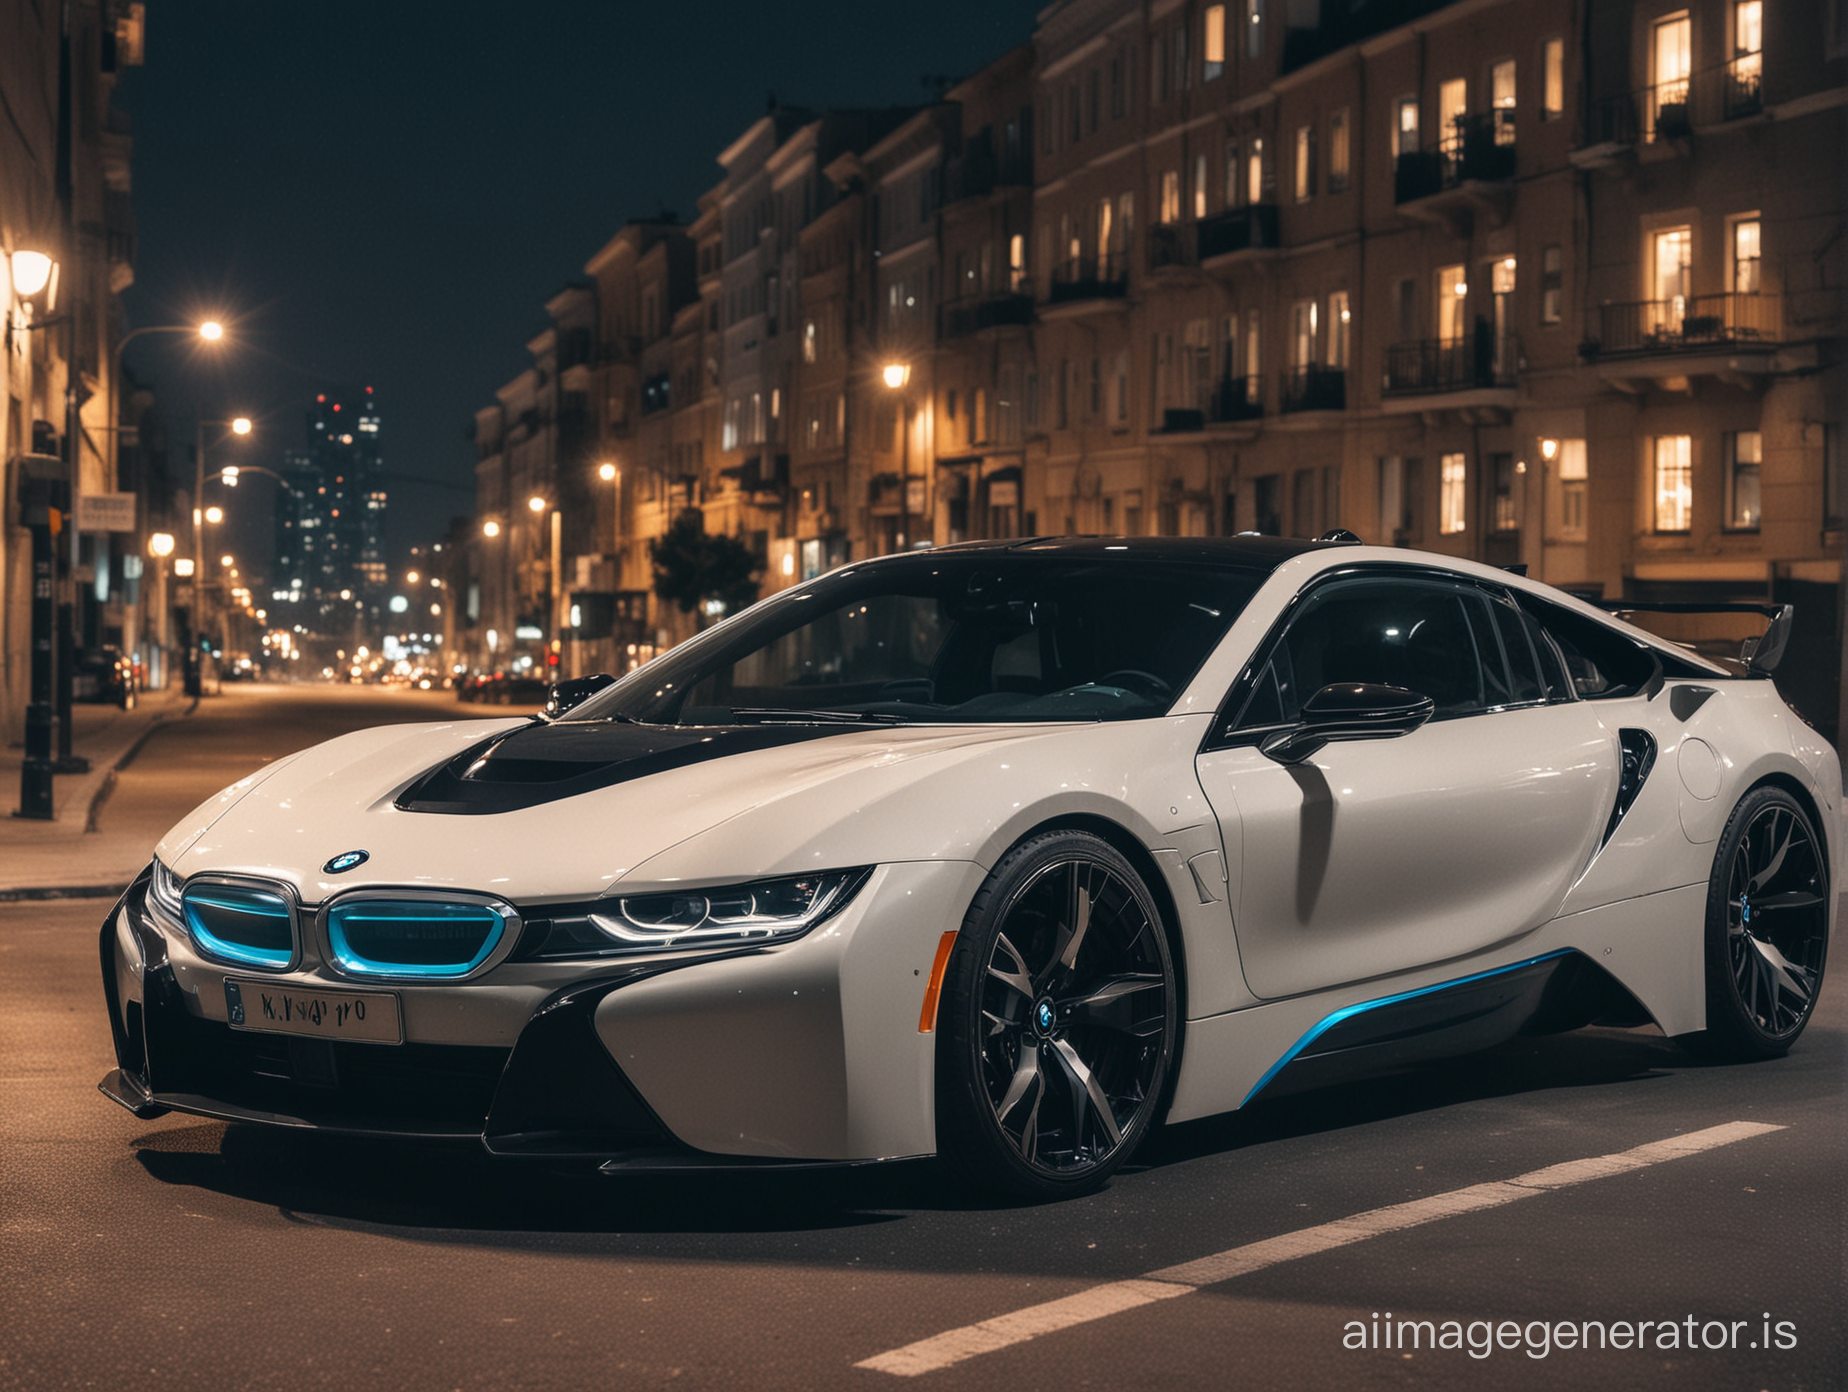 Extreme Khyzyl saleem version of the BMW i7 executive car (not i8) Heavy modifications. City at night.